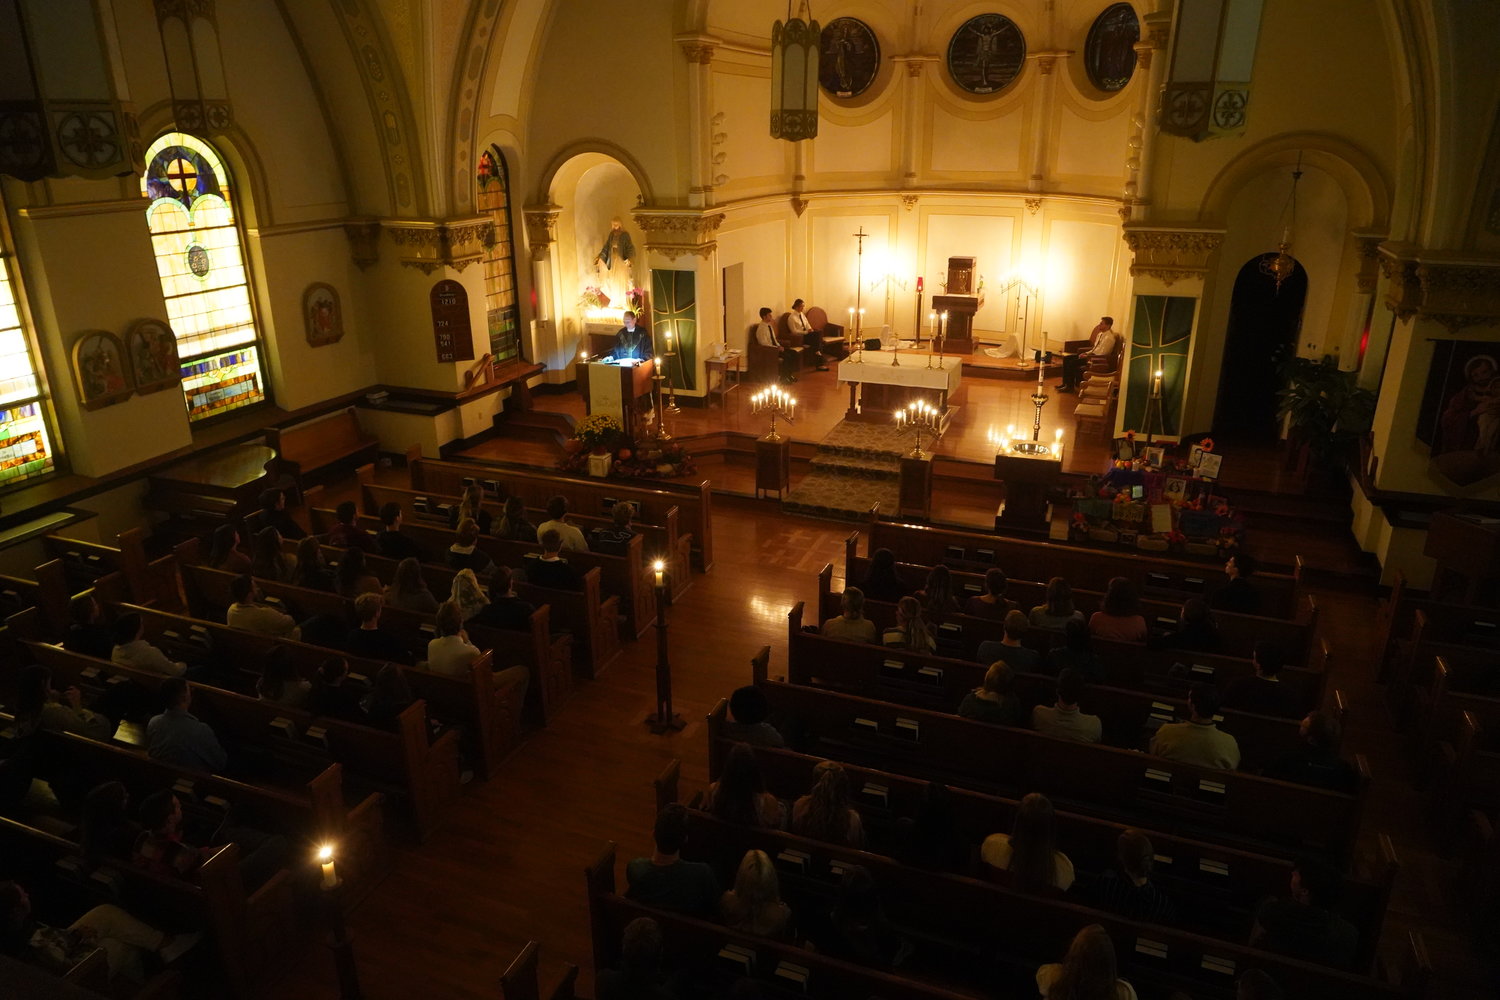 Father Daniel Merz offers Mass by candlelight the evening of Nov. 2, the Commemoration of the Faithful Departed (All Souls) in Sacred Heart Church in Columbia.